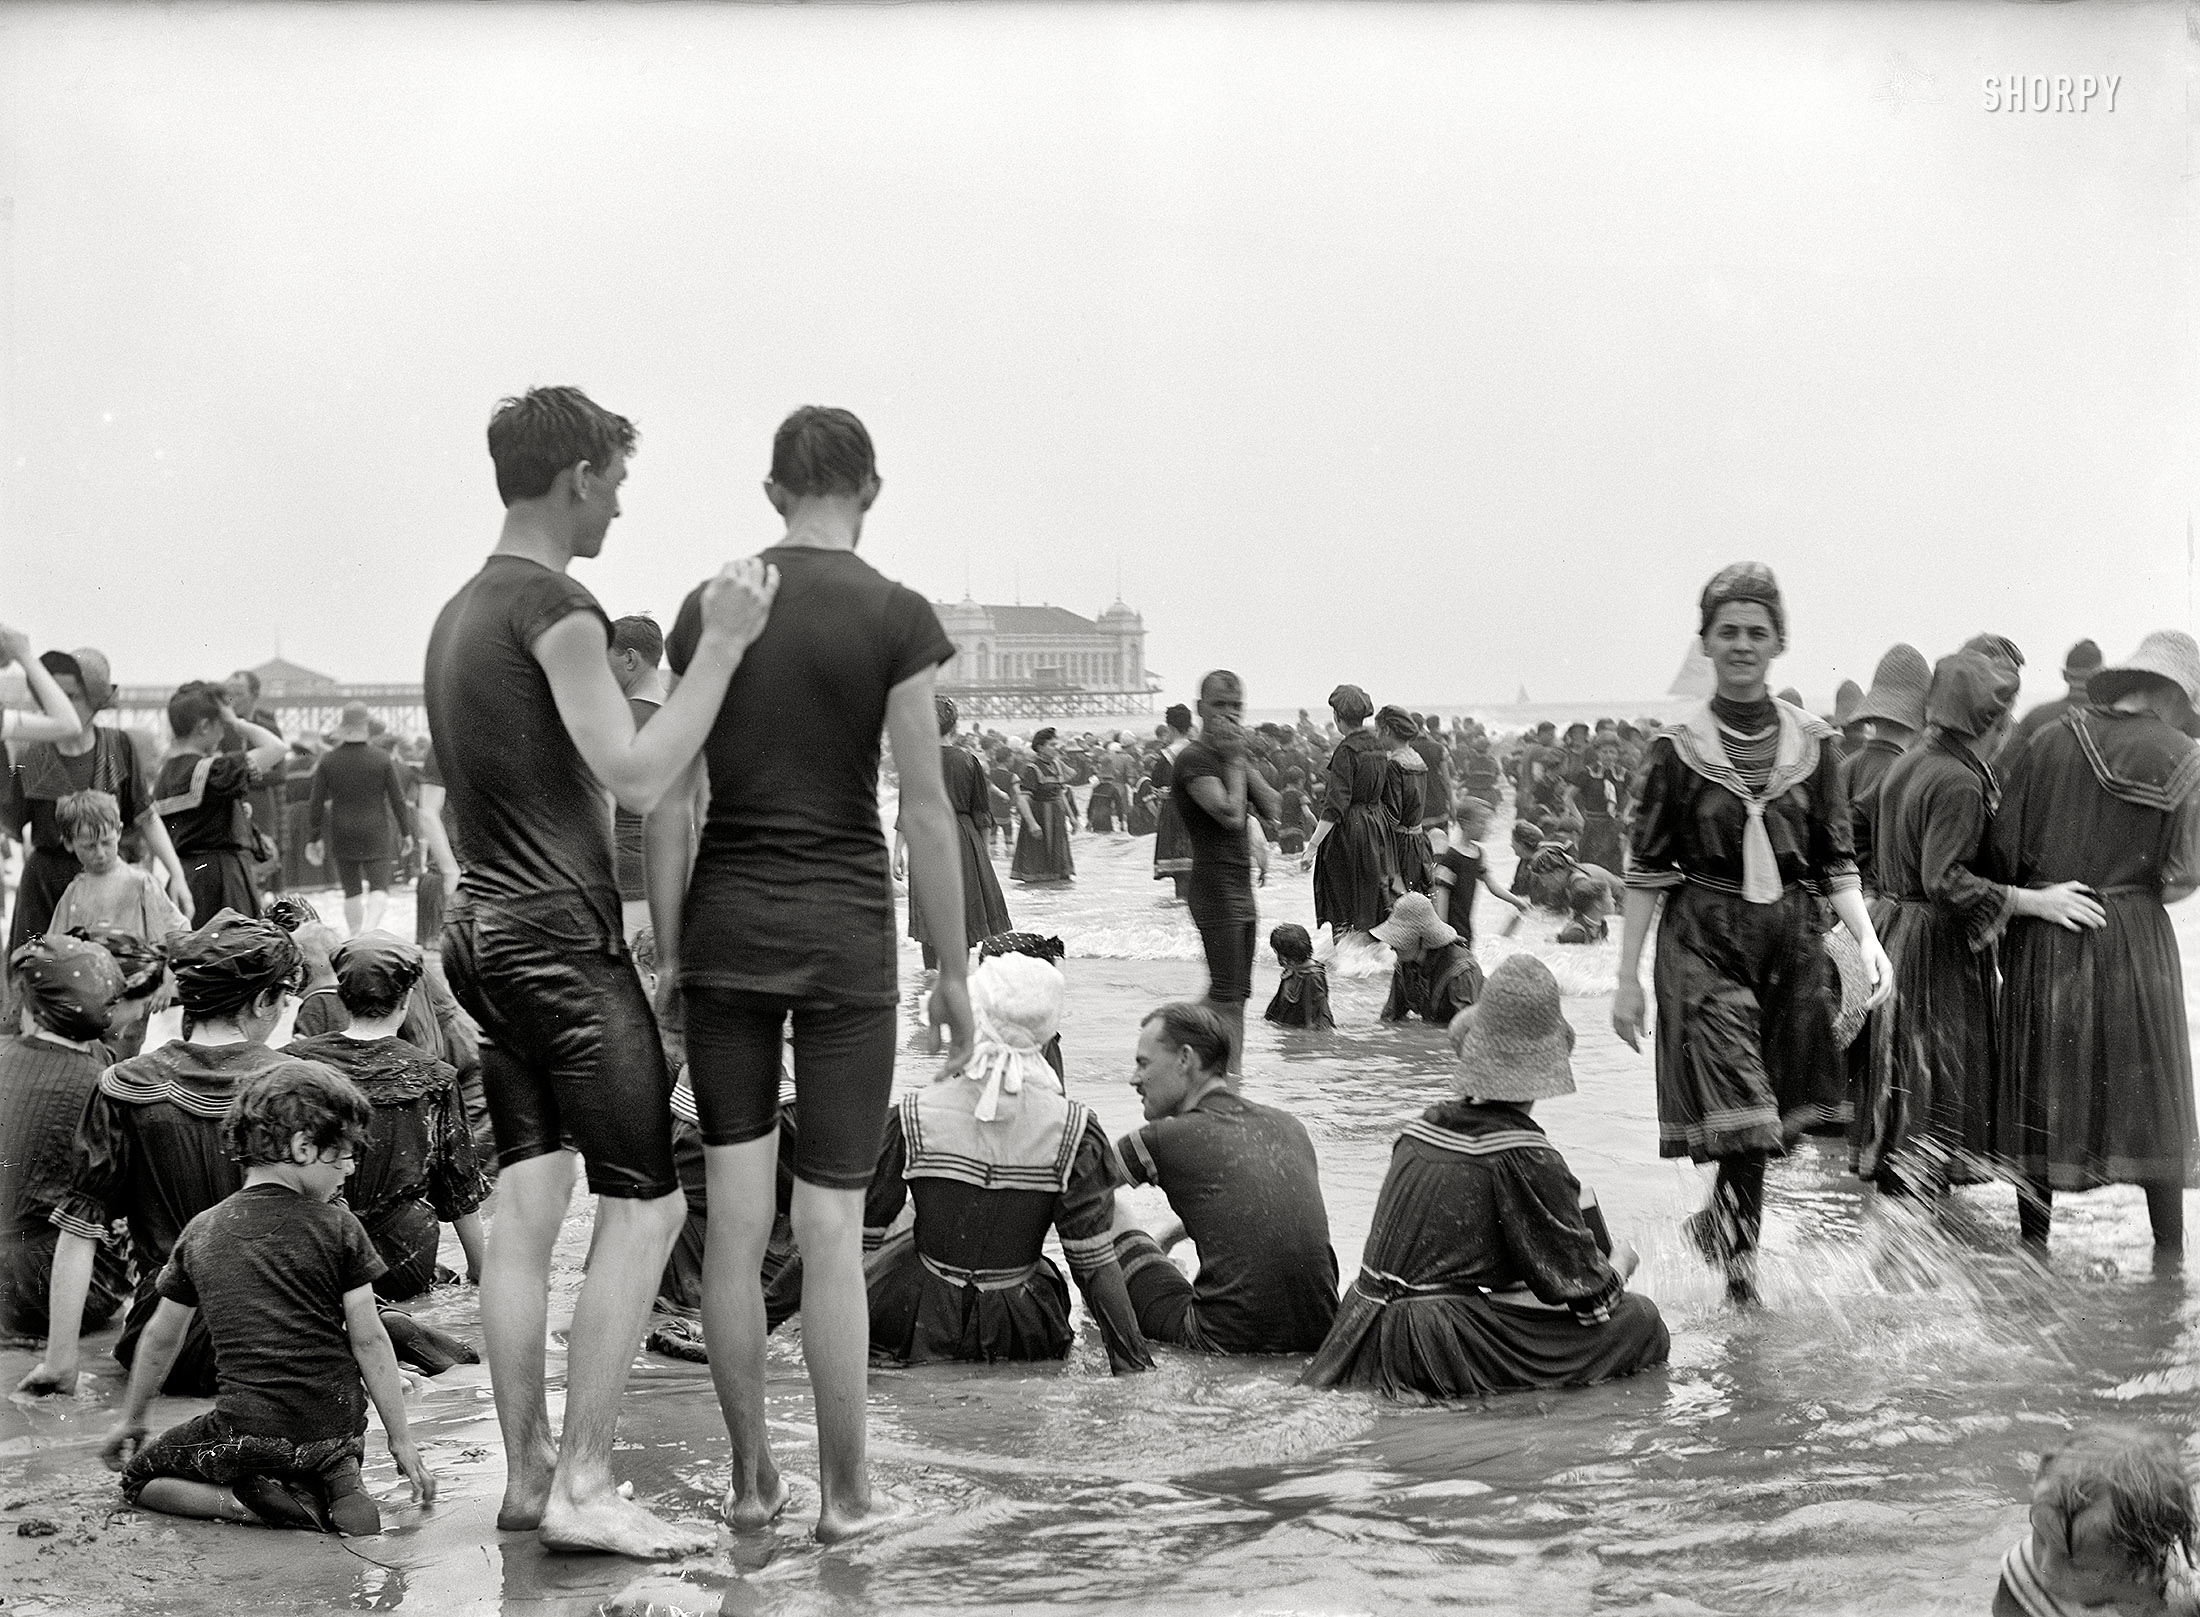 The Jersey Shore circa 1905. "Crowded beach, Atlantic City." These boys have been standing here for over an hour, hoping to spy a bare ankle. View full size.